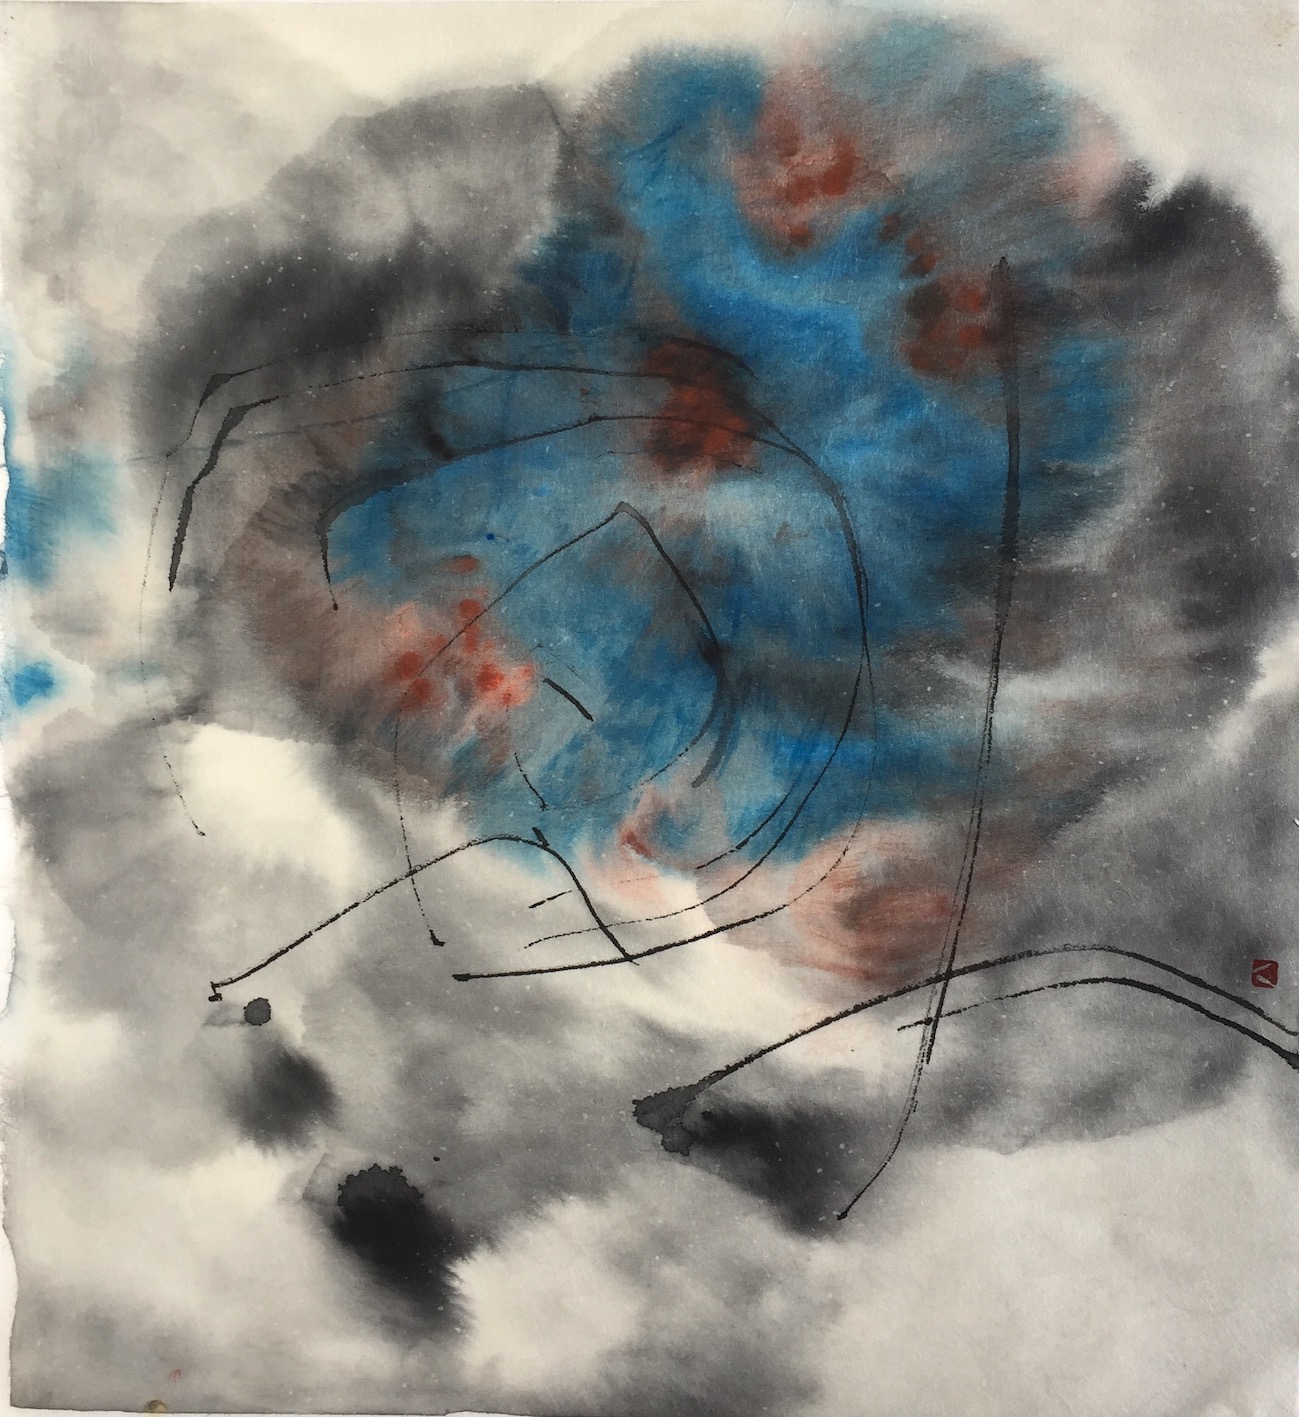 Clouds Dancing 3 24 X 25 cms Sumi ink, acrylic, 踊る雲 3 墨、アクリル　　2020